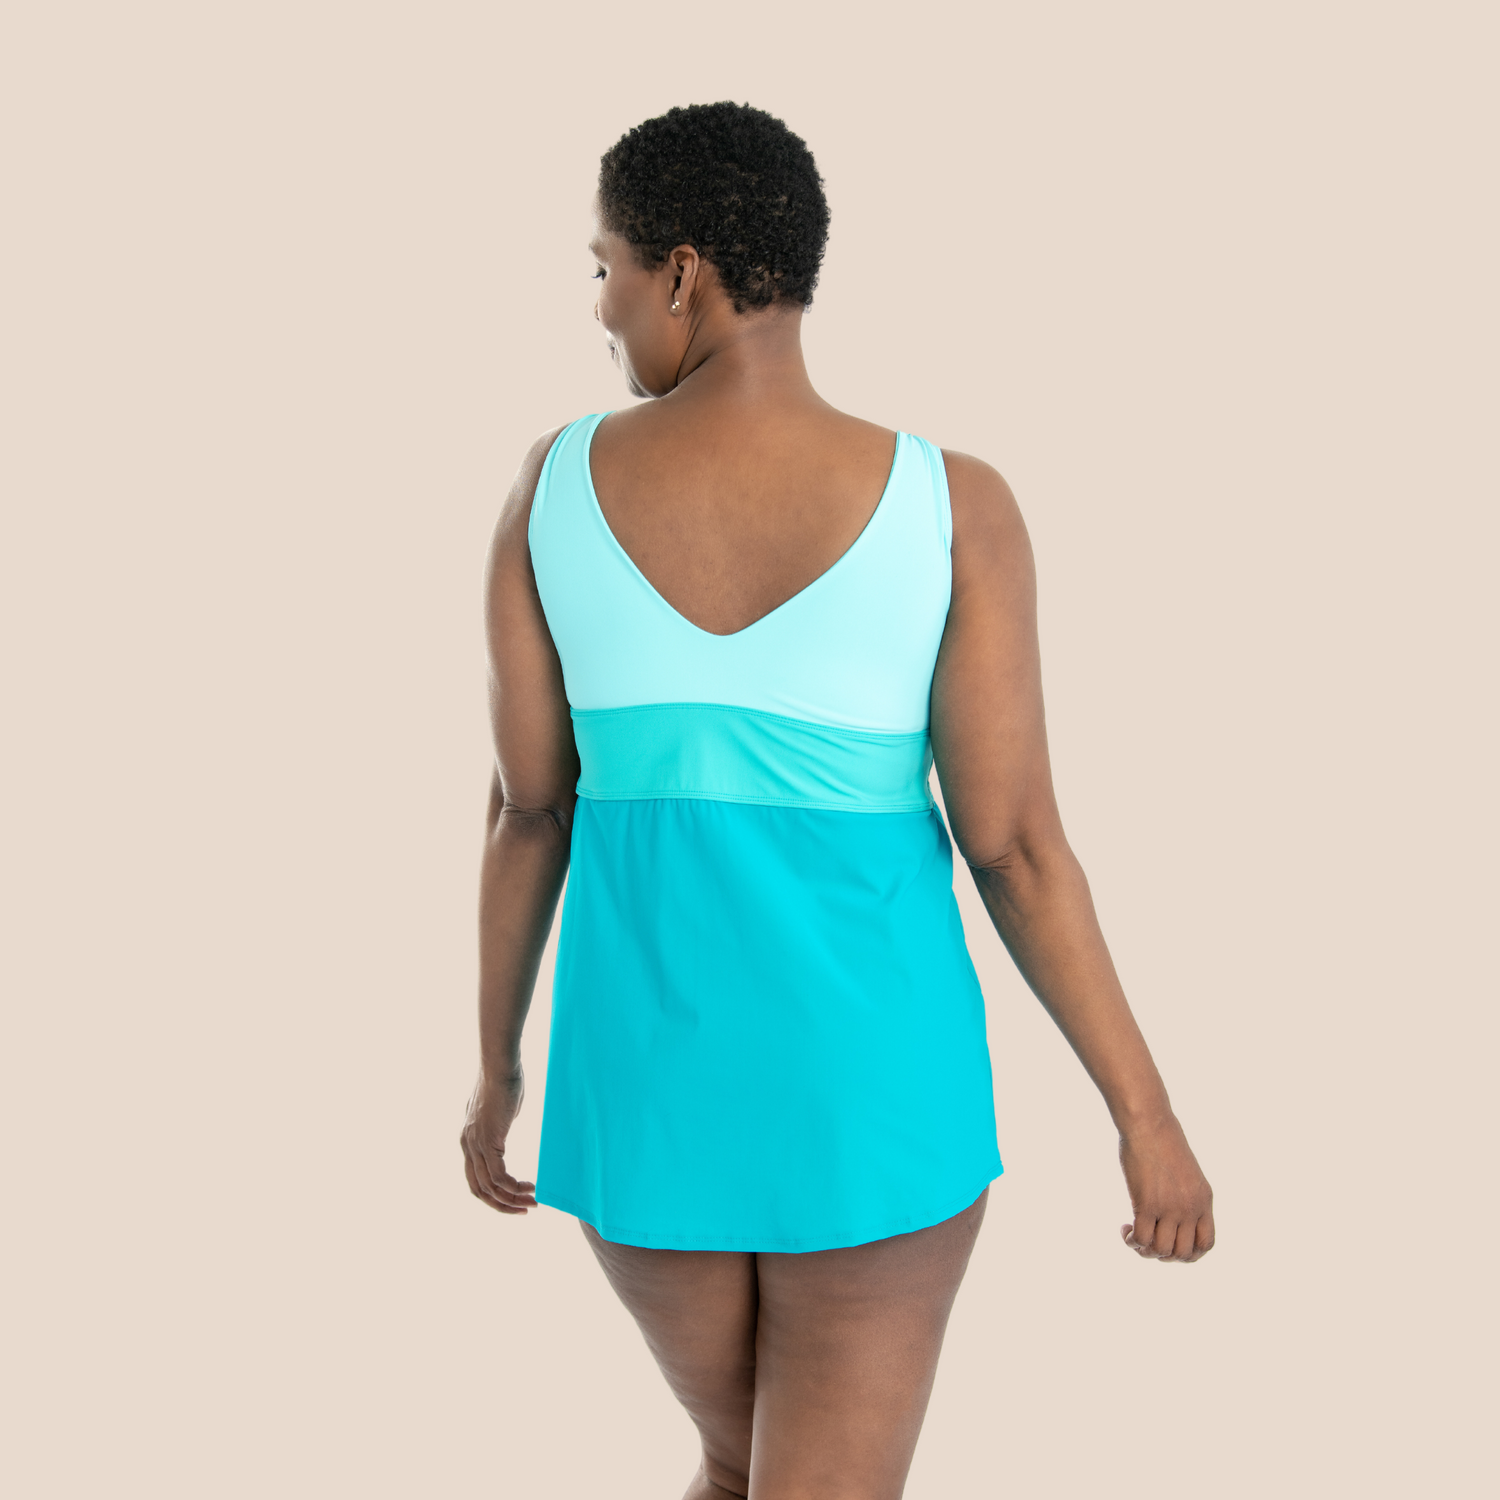 Banded Color Block Tankini Top - Turquoise/Mint/Jade